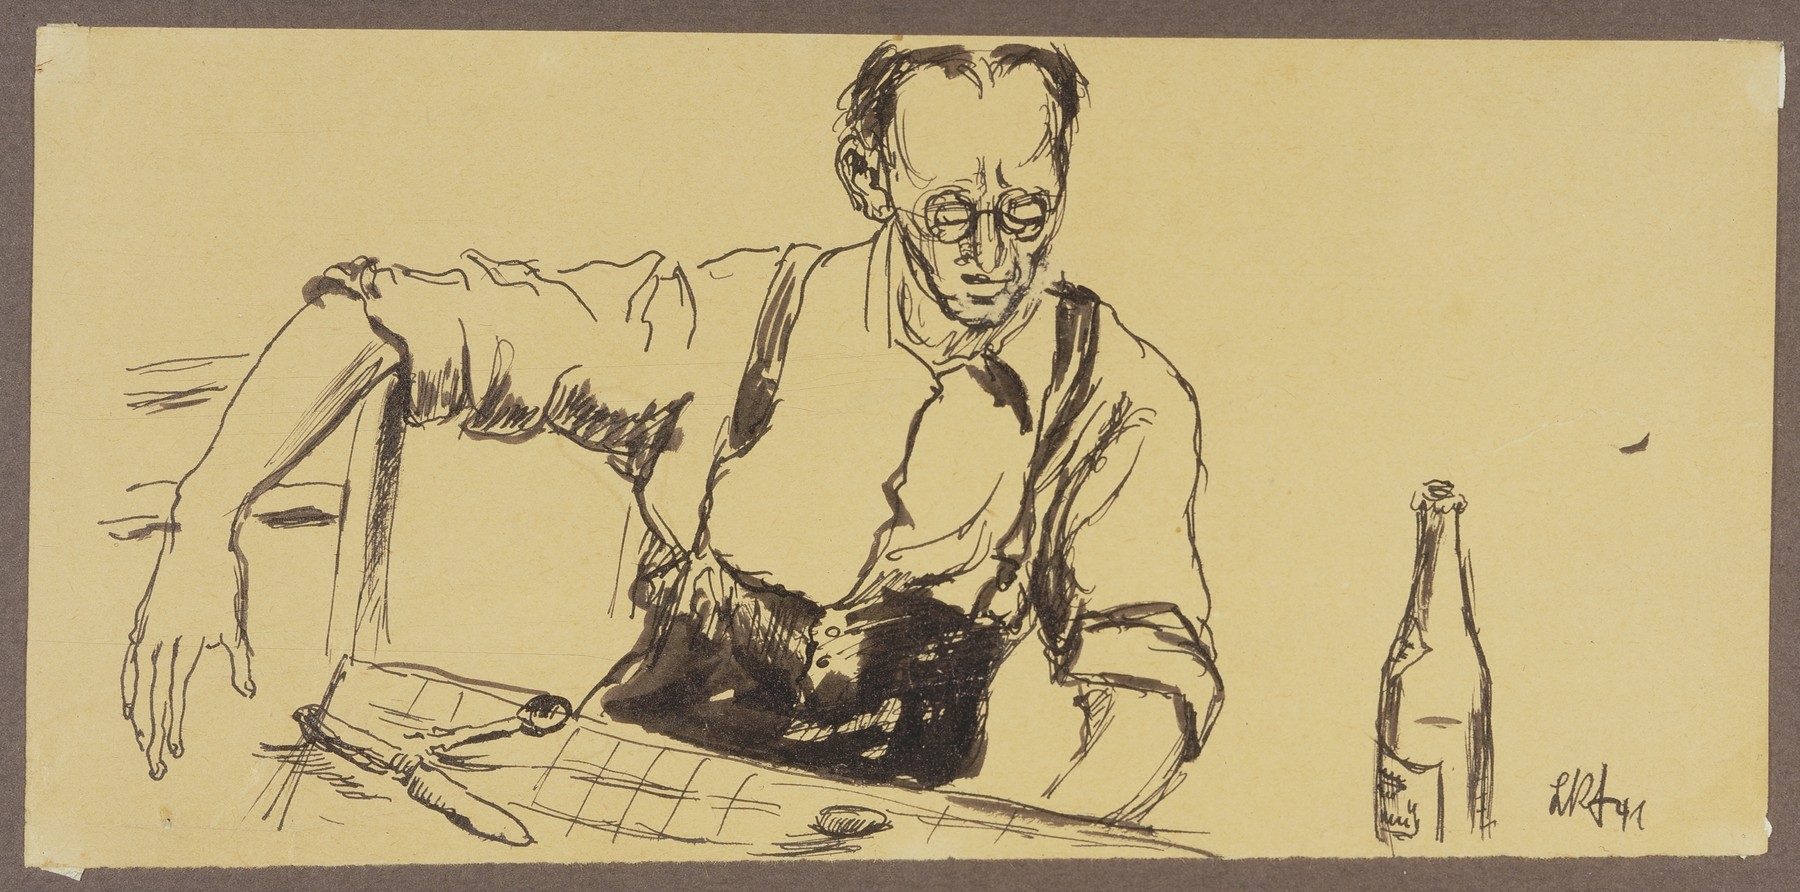 "Male Internee Seated at Table with Silverware and Bottle, Camp de Gurs"  by Lili Andrieux.